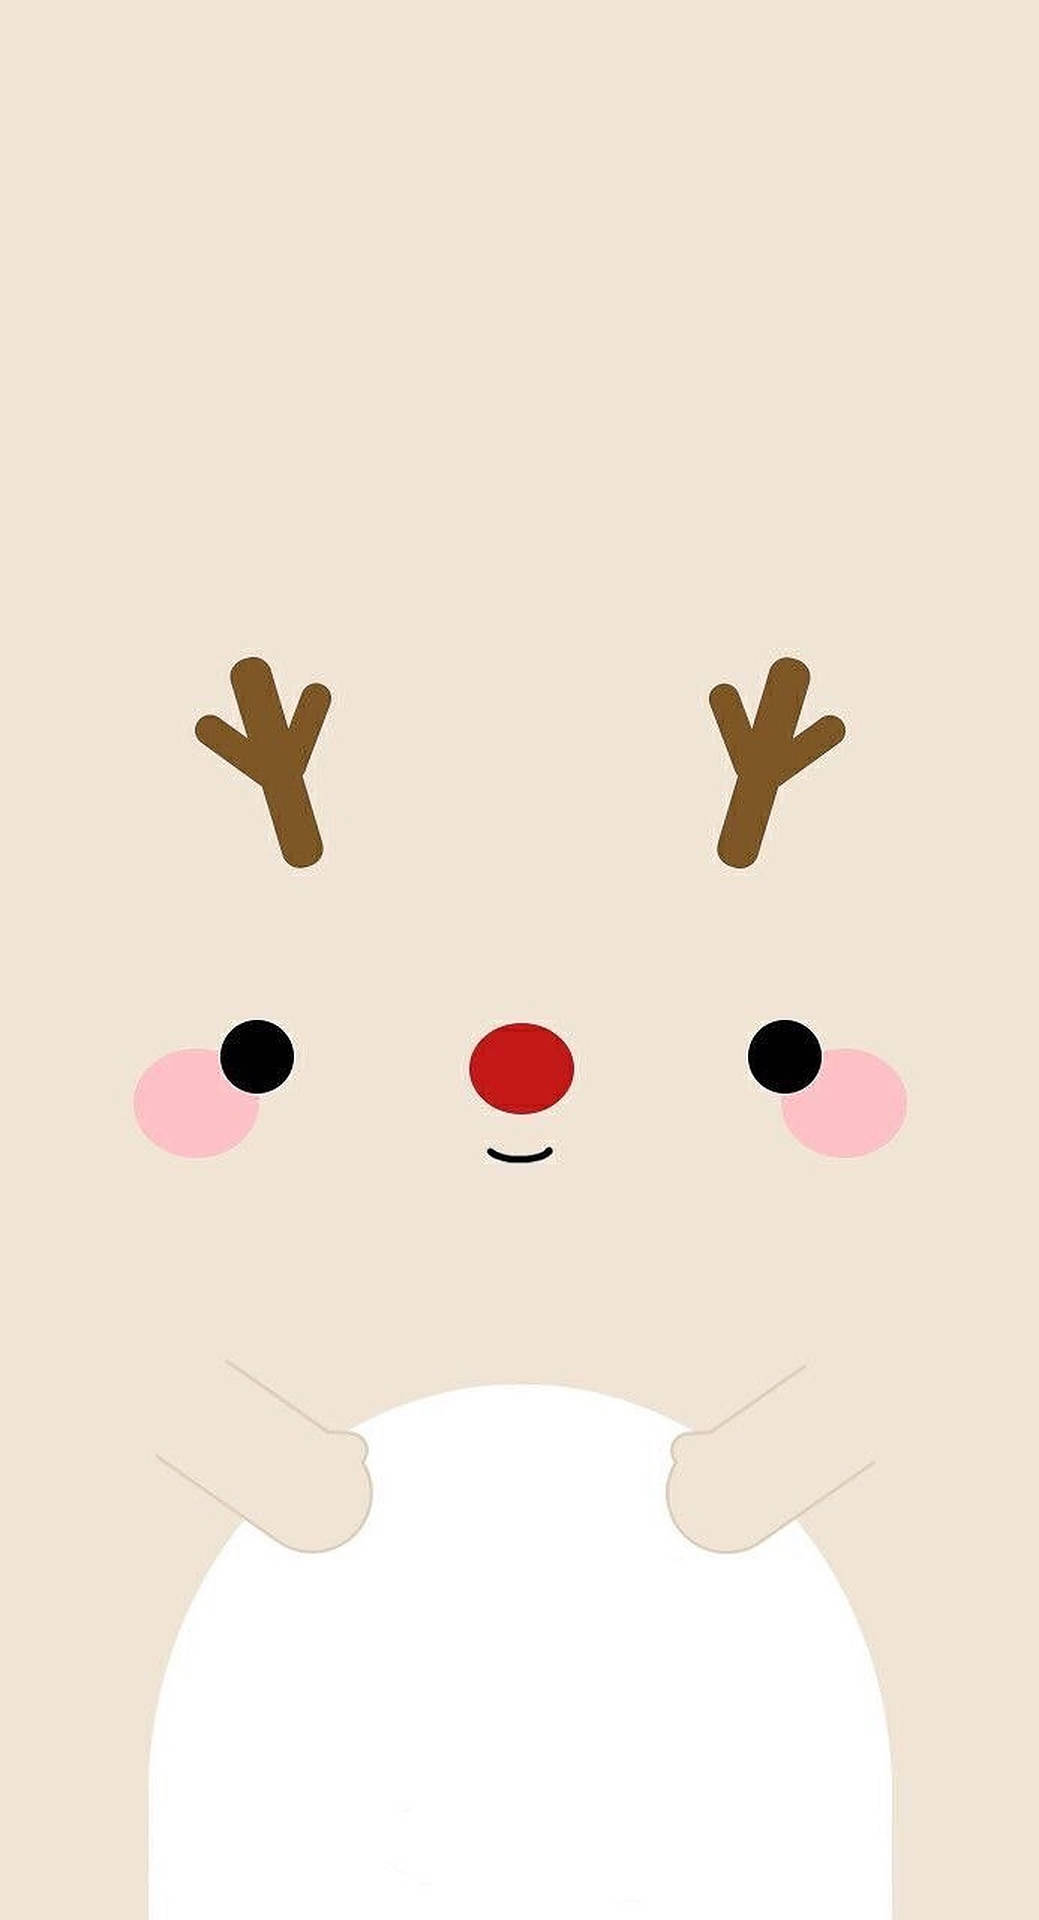 Cute Reindeer Christmas Close-up Background